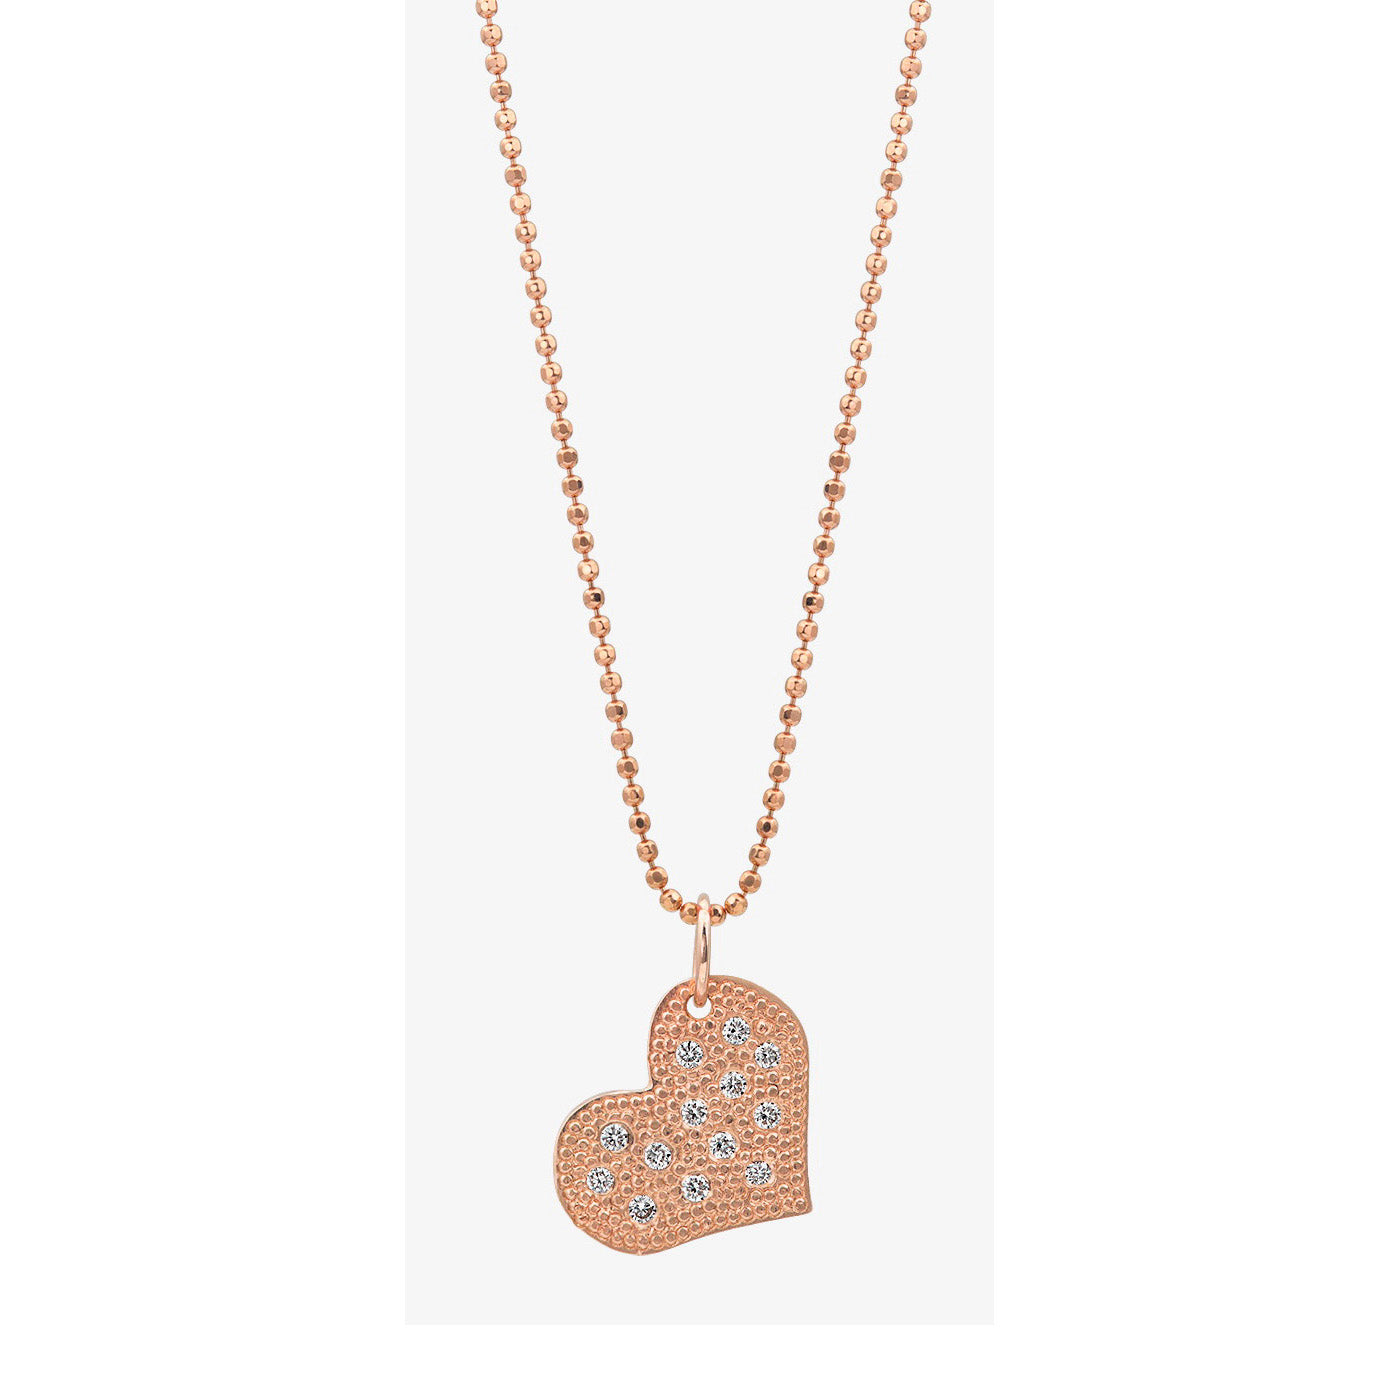 14k rose gold LAVA baby heart with scattered diamonds